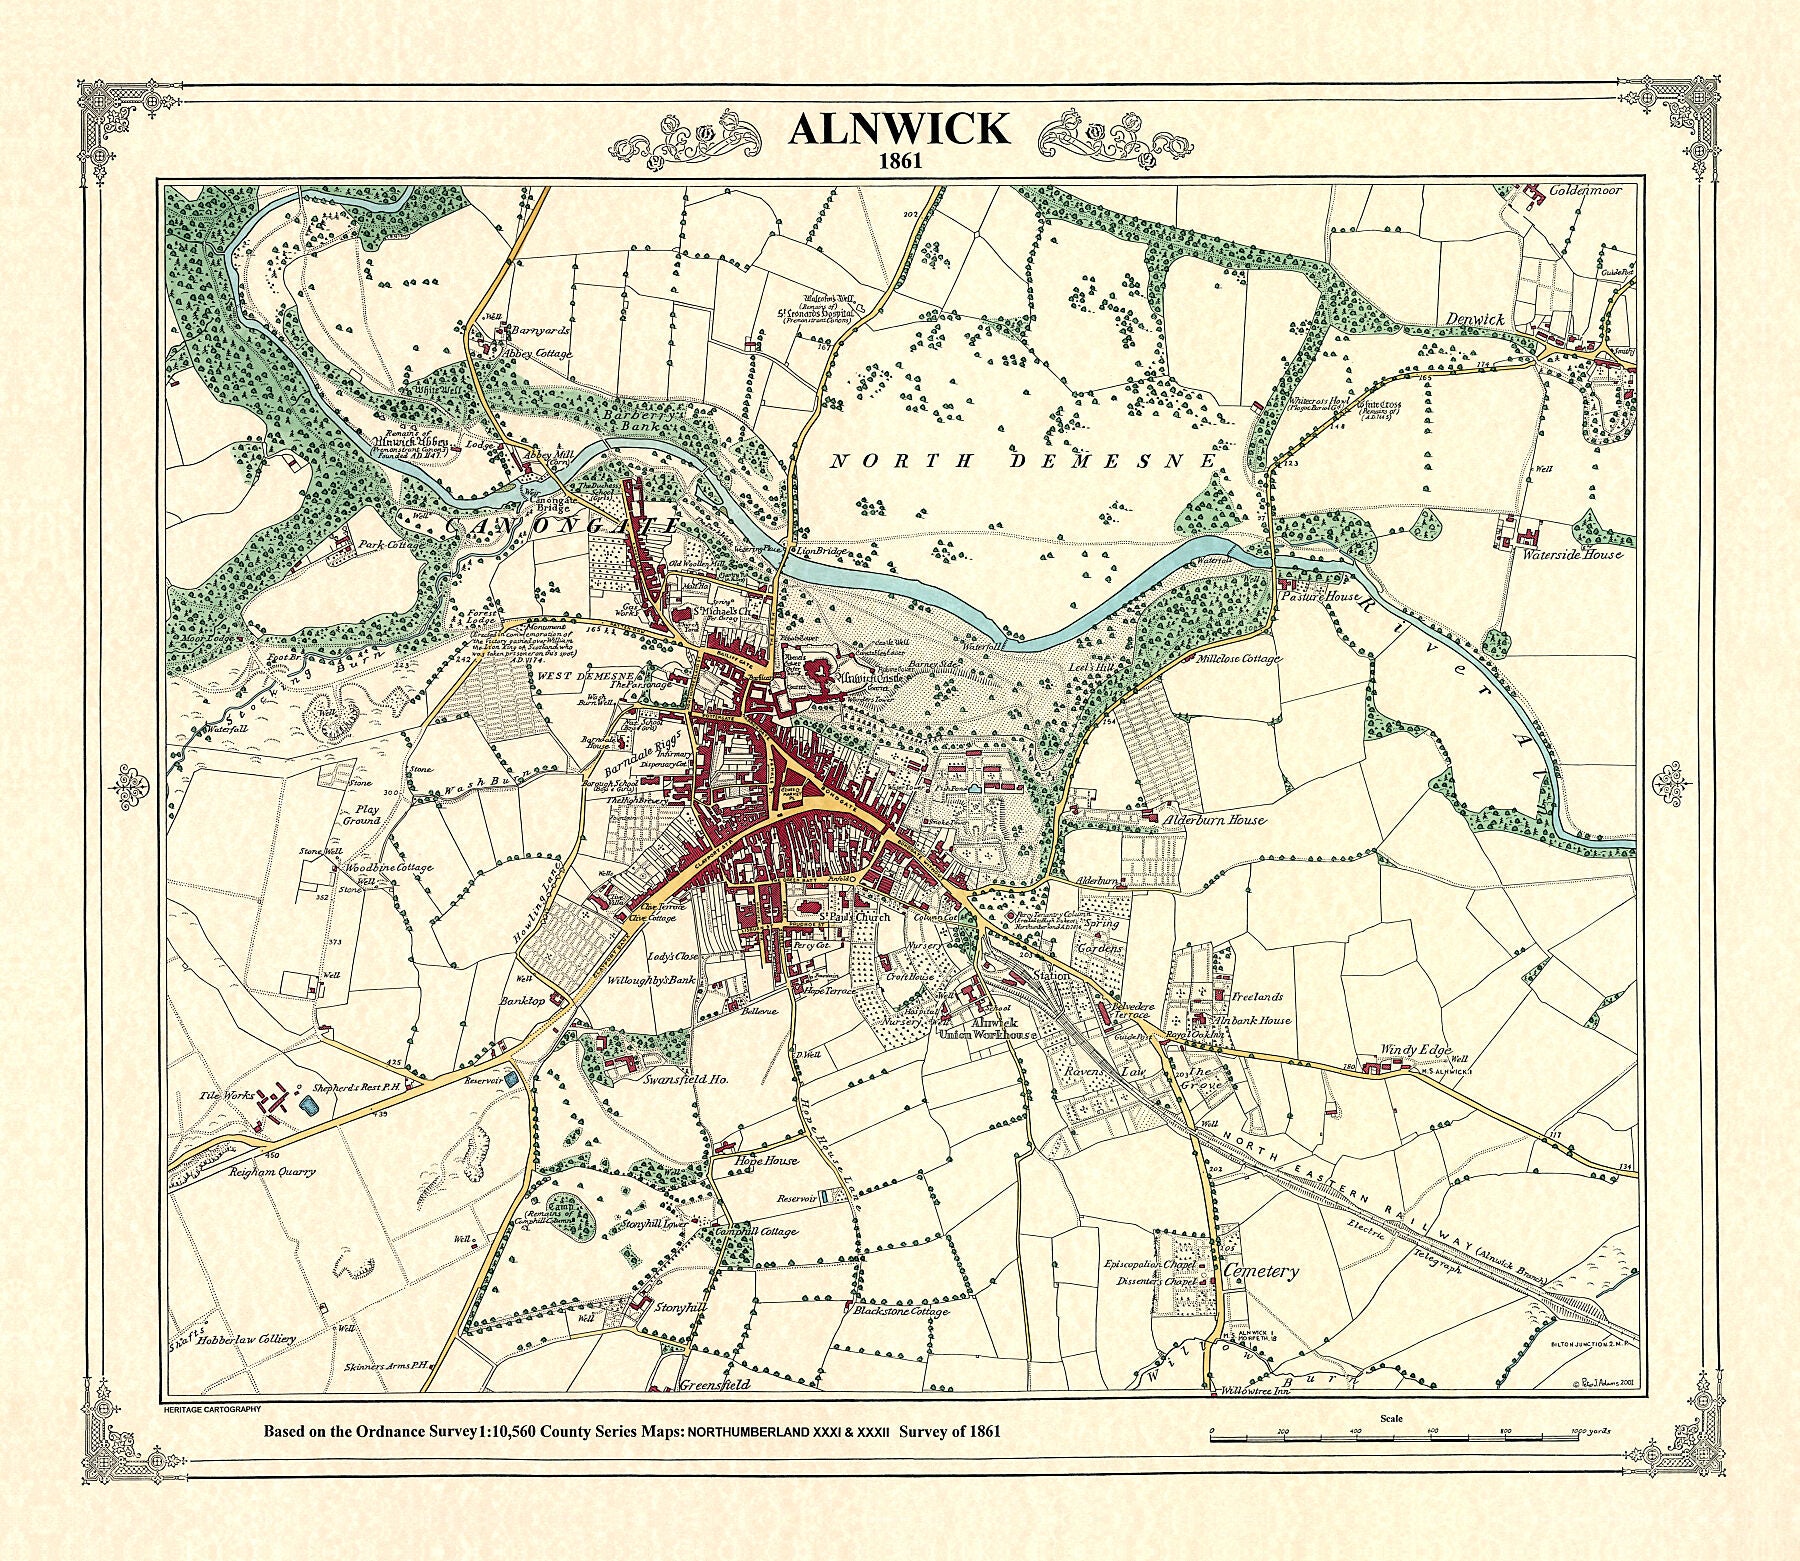 Coloured Victorian map of Alnwick in 1861 by Peter J Adams of Heritage Cartography